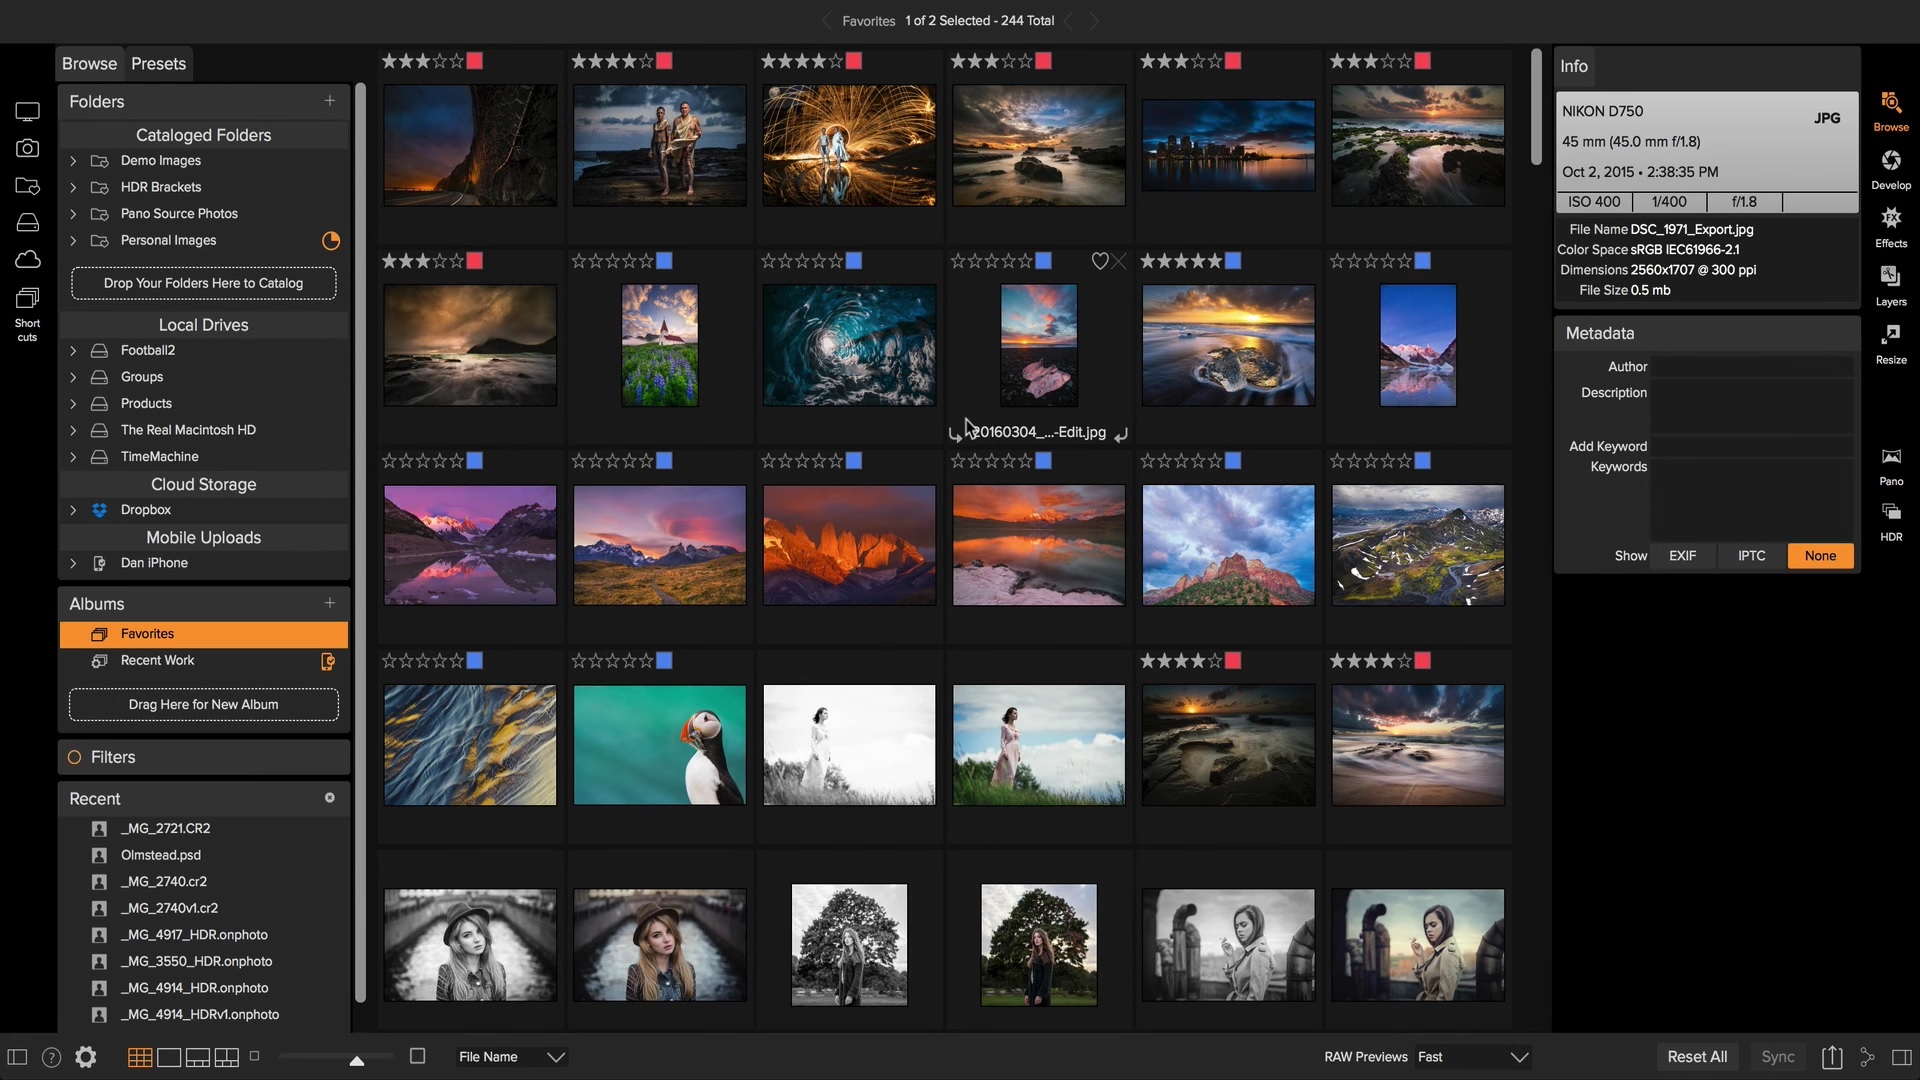 download the new version ON1 Photo RAW 2024